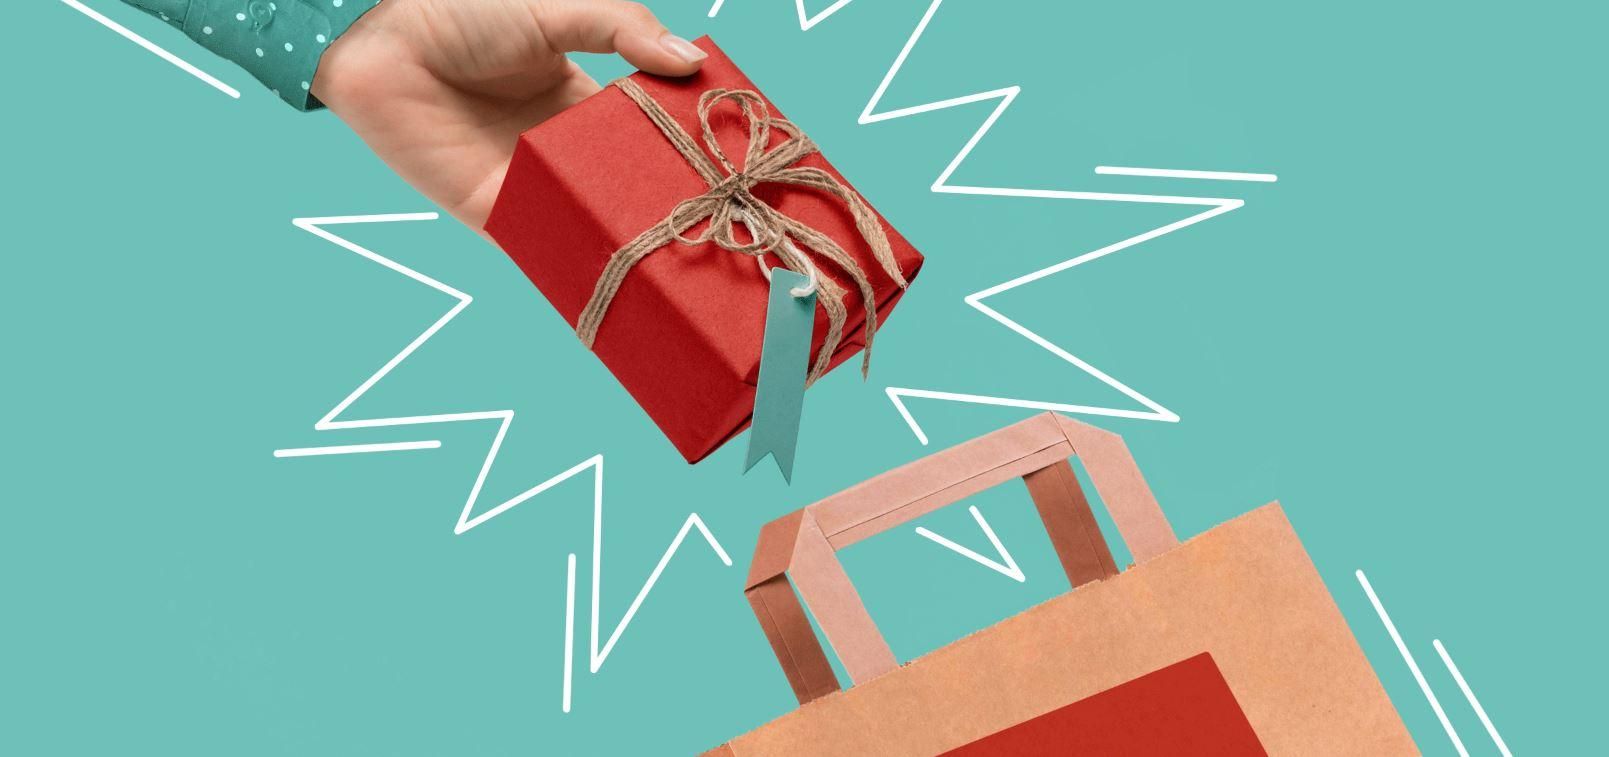 The Perfect Virtual Gift Ideas To Send From Anywhere Around The World